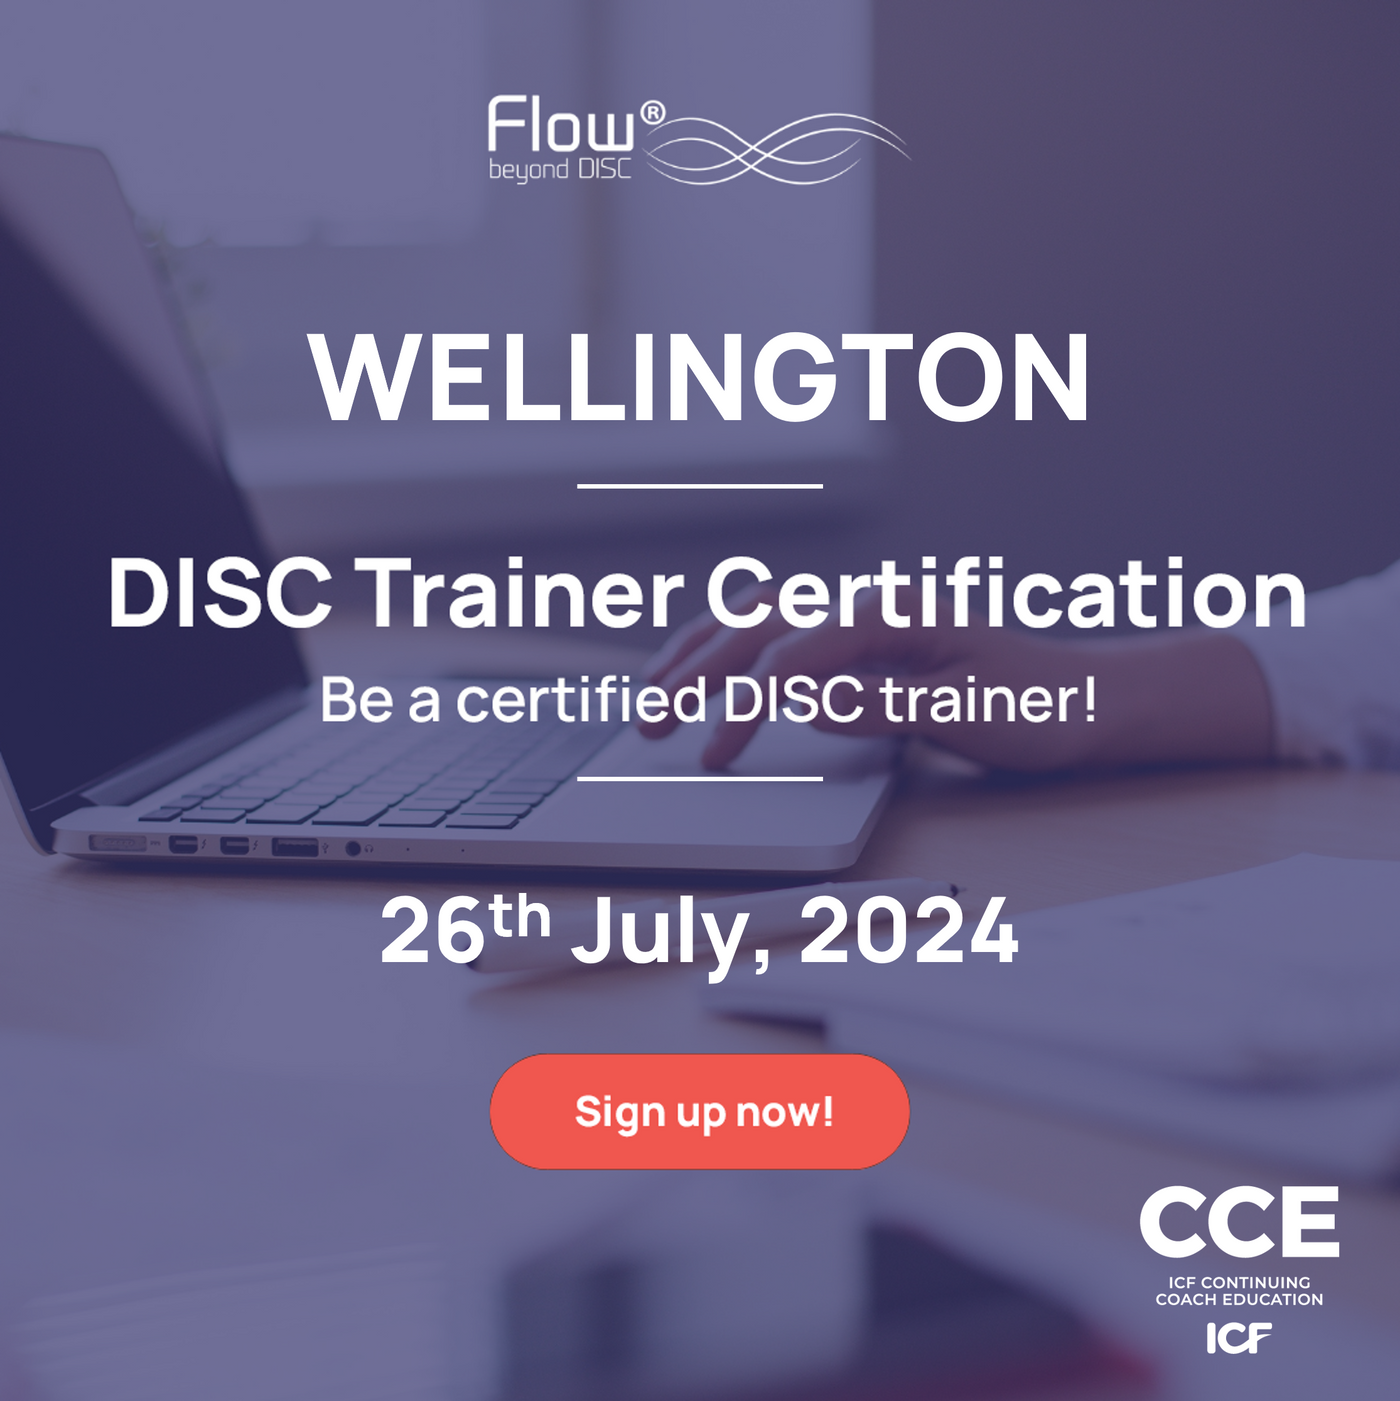 WELLINGTON Advanced Certification Course - receives ICF CCE points